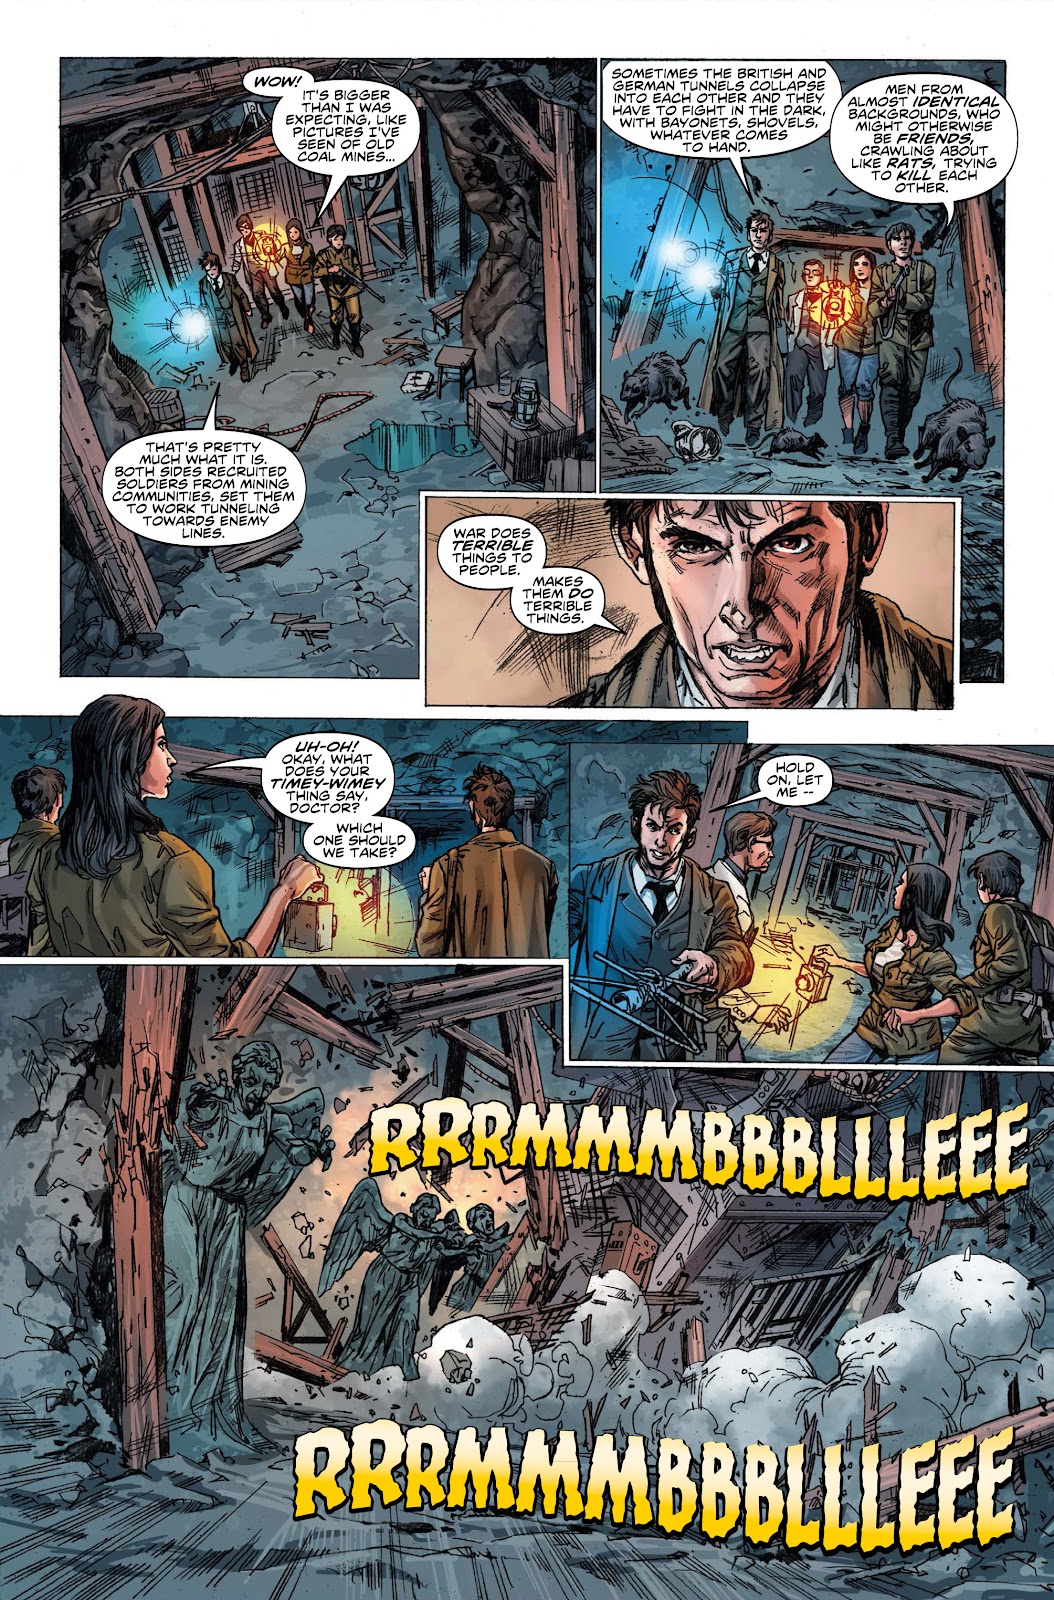 Doctor Who: The Tenth Doctor issue 9 - Page 7